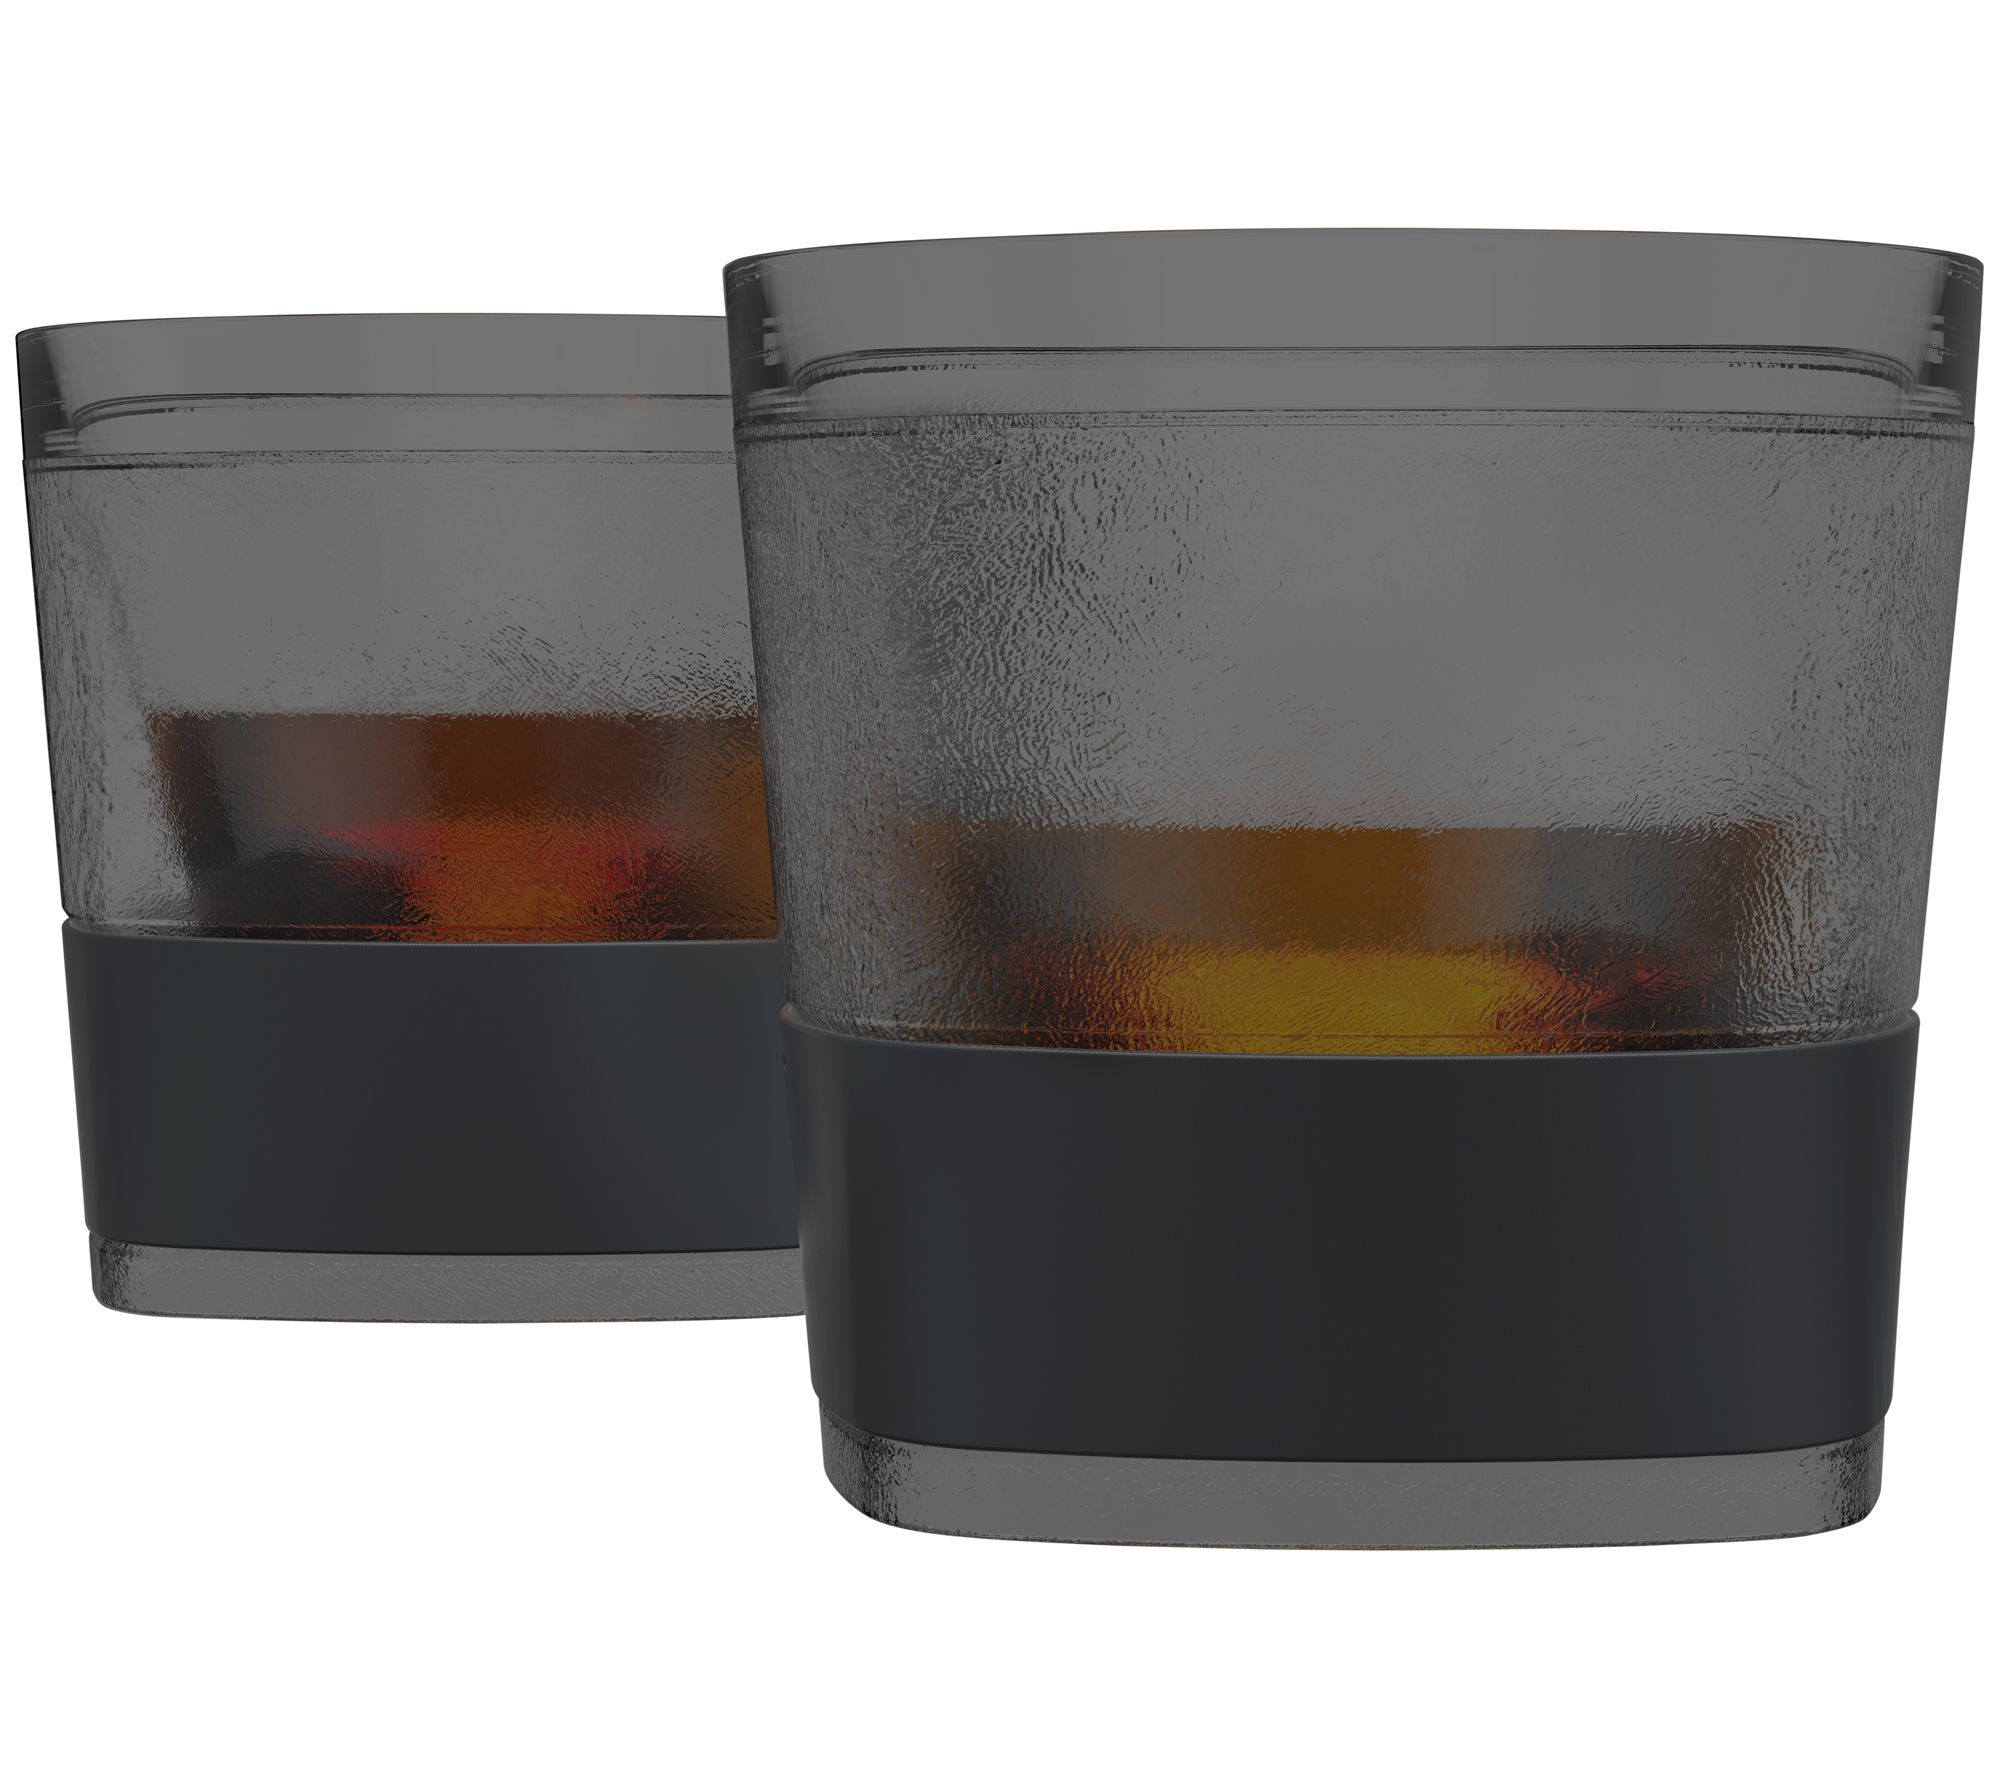 HOST Freeze Insulated Martini Cooling Cups, Plastic Freezer Gel Chiller  Double Wall Stemless Cocktail Glass Set of 2, 9 oz, Grey